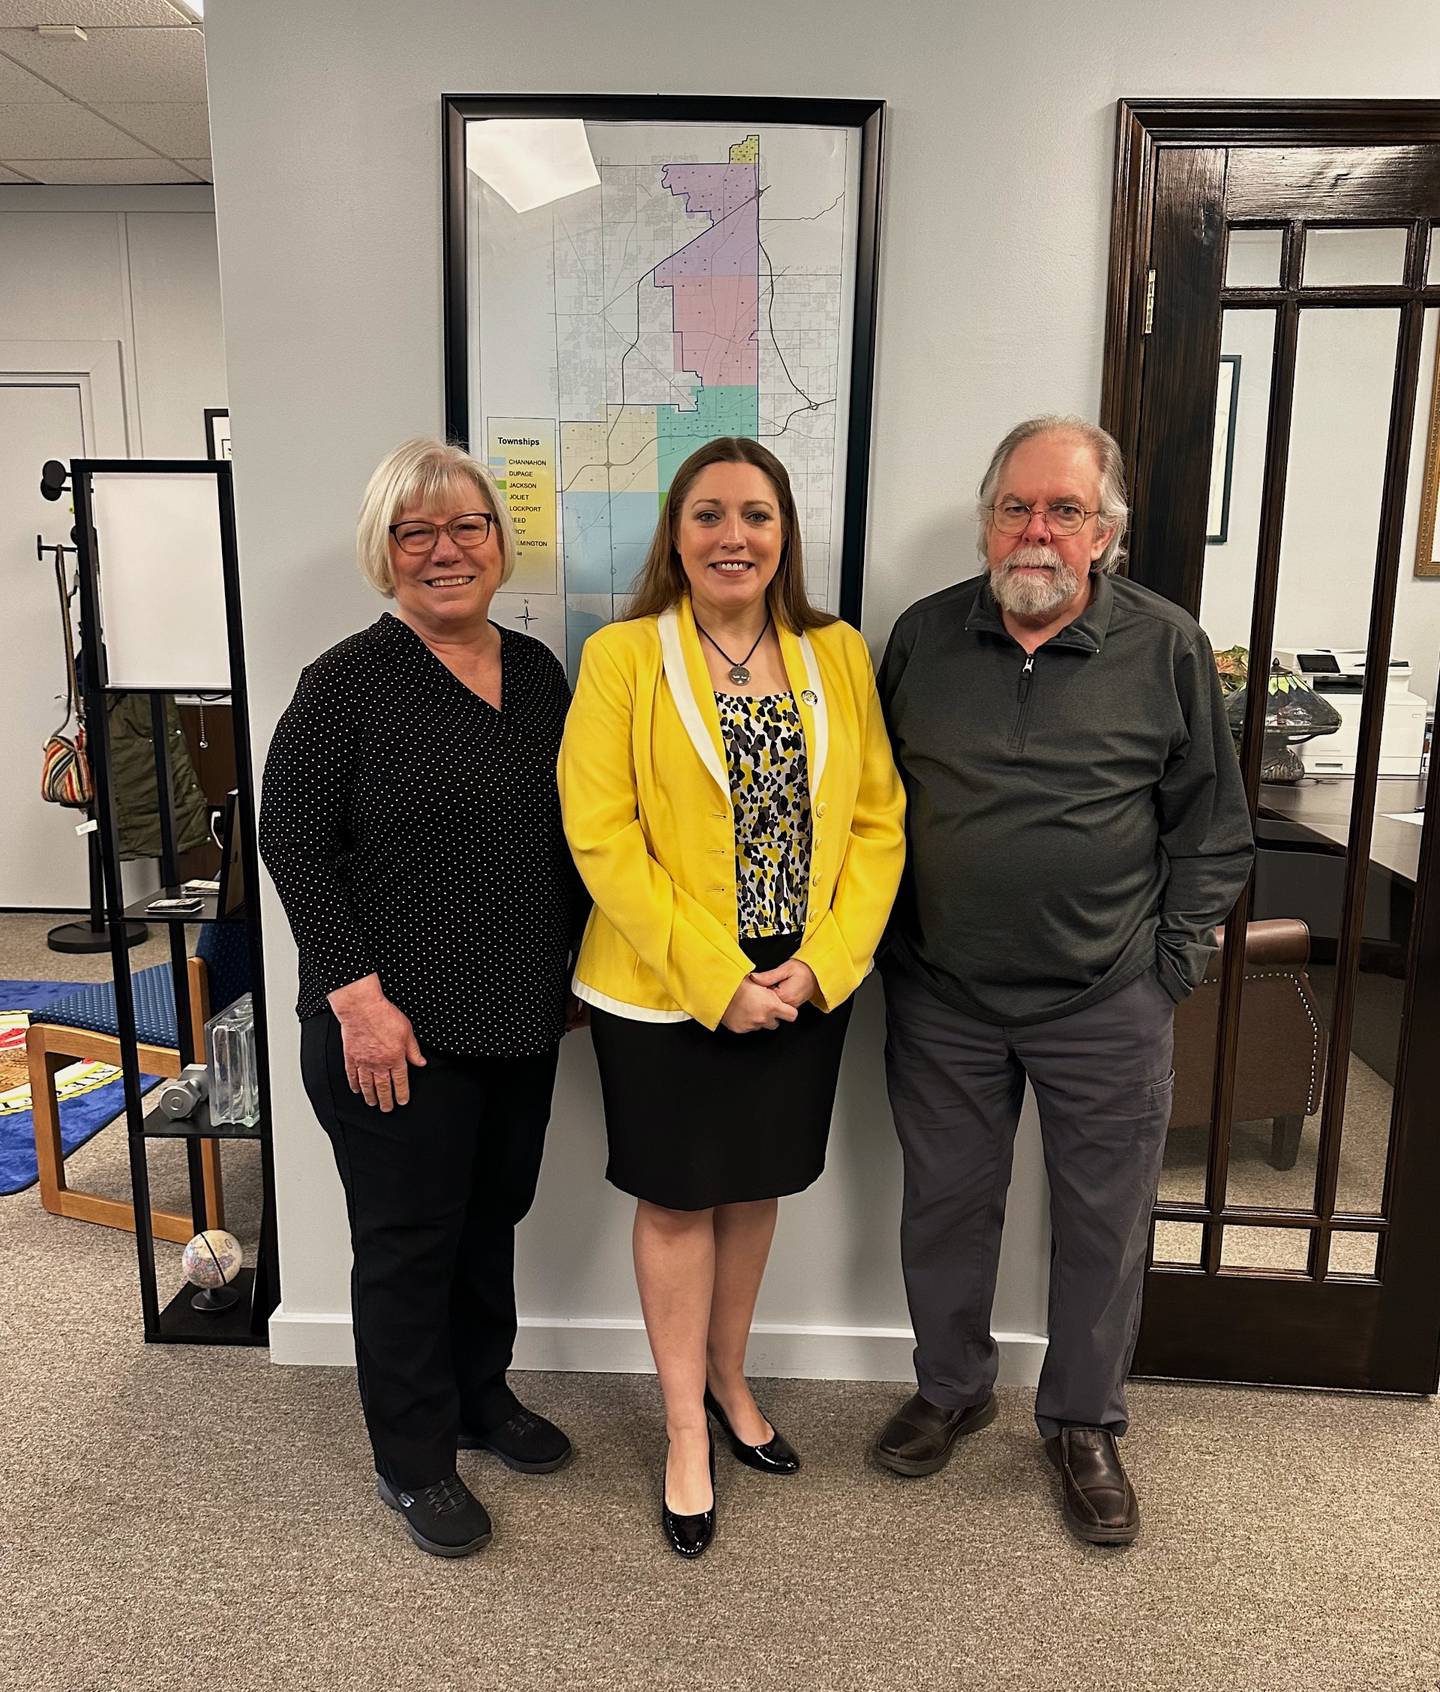 State Sen. Rachel Ventura, D-Joliet, (center) poses with Karen Pastell of Shorewood (left) and Karen Pastell's husband Paul Pastell (right). Ventura's office helped connect the Pastells with $10,000 of unclaimed property through ICash.